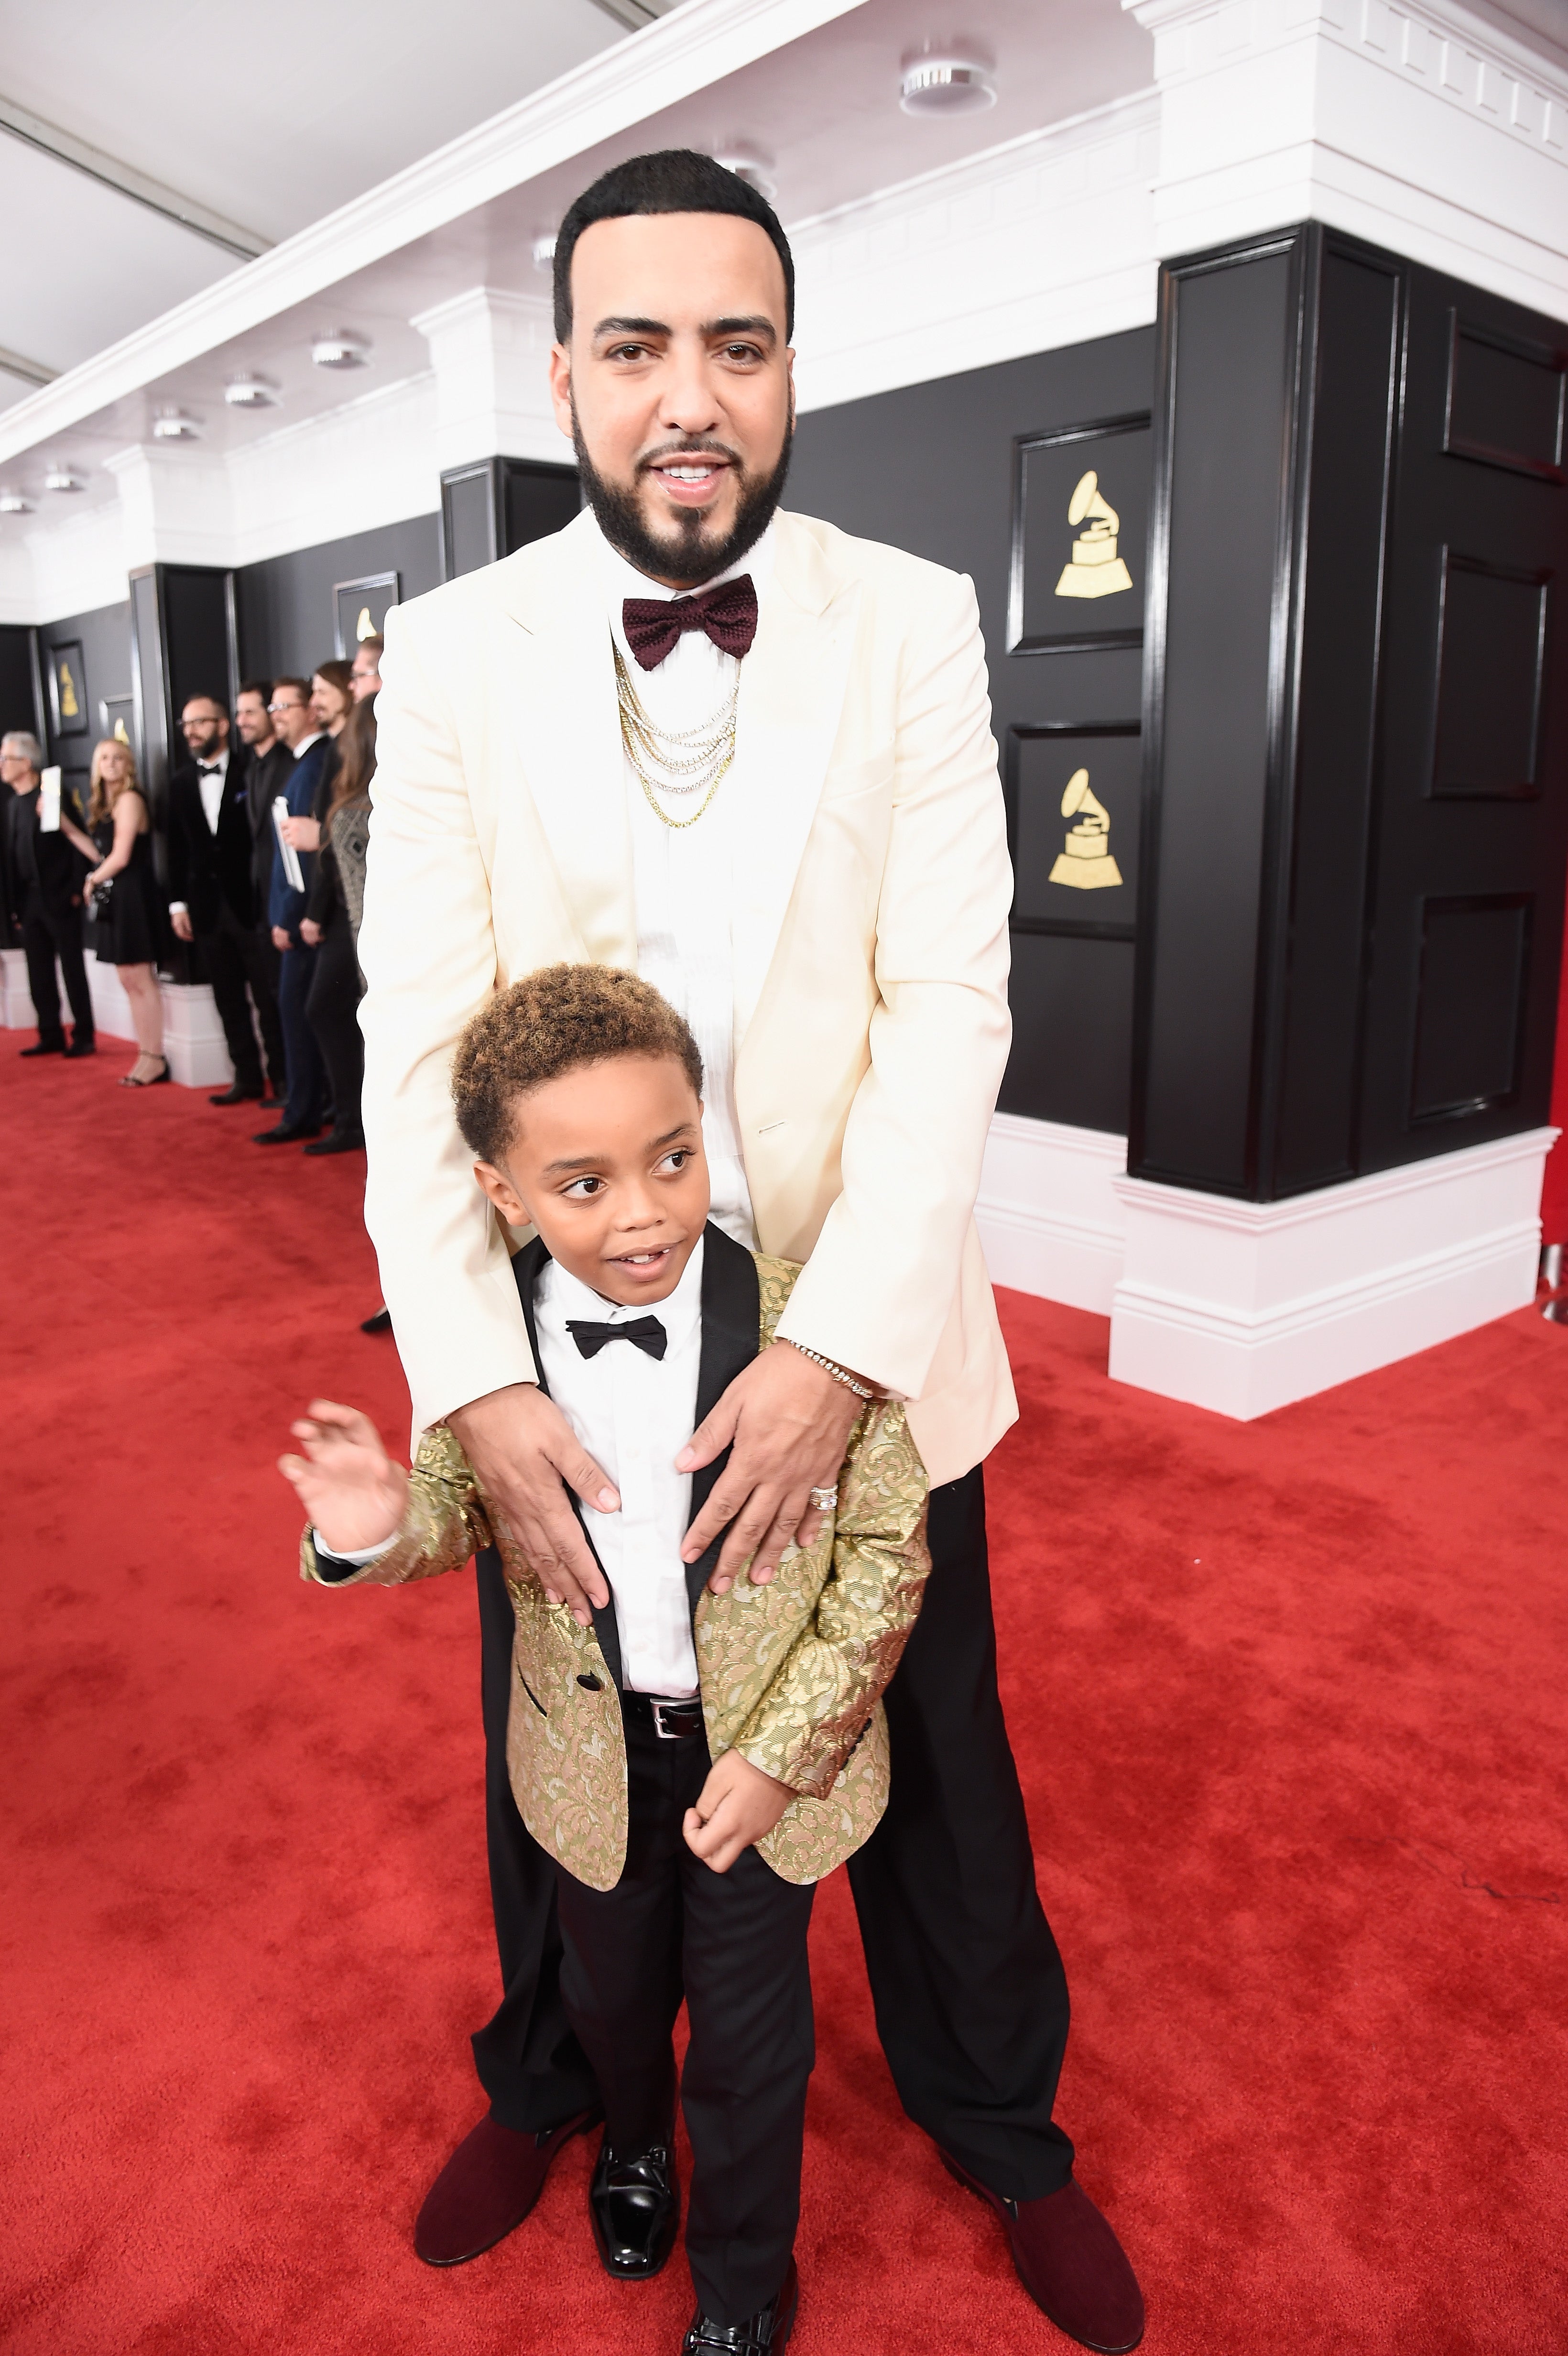 The 59th Annual Grammy Awards Red Carpet Was on Another Level of Fabulous